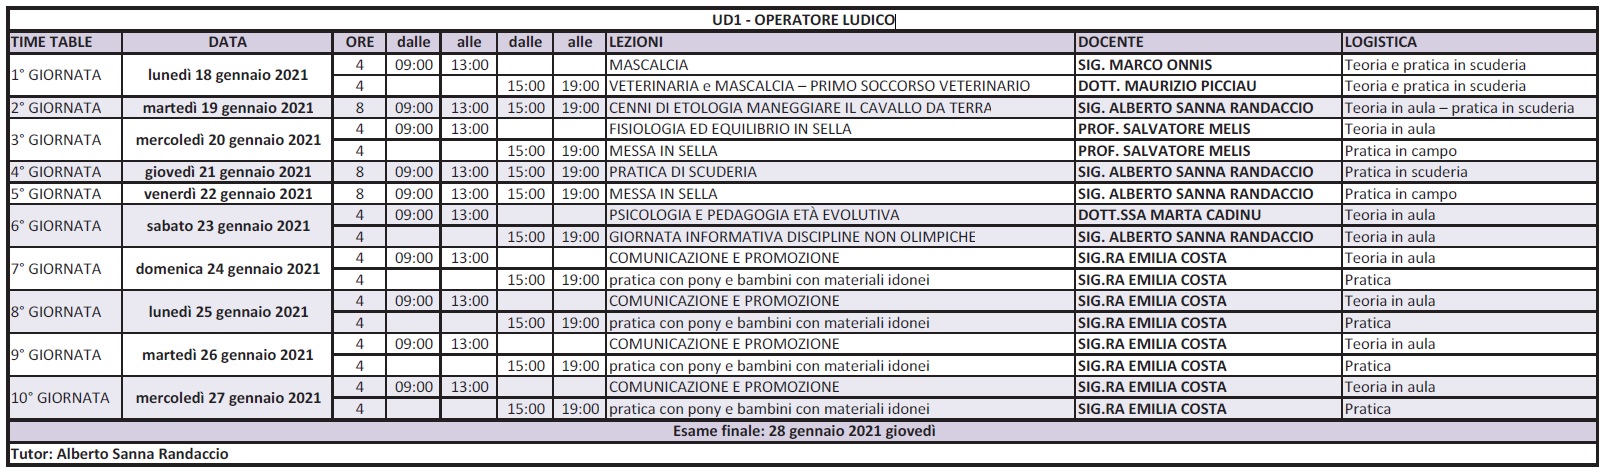 UD1 time table